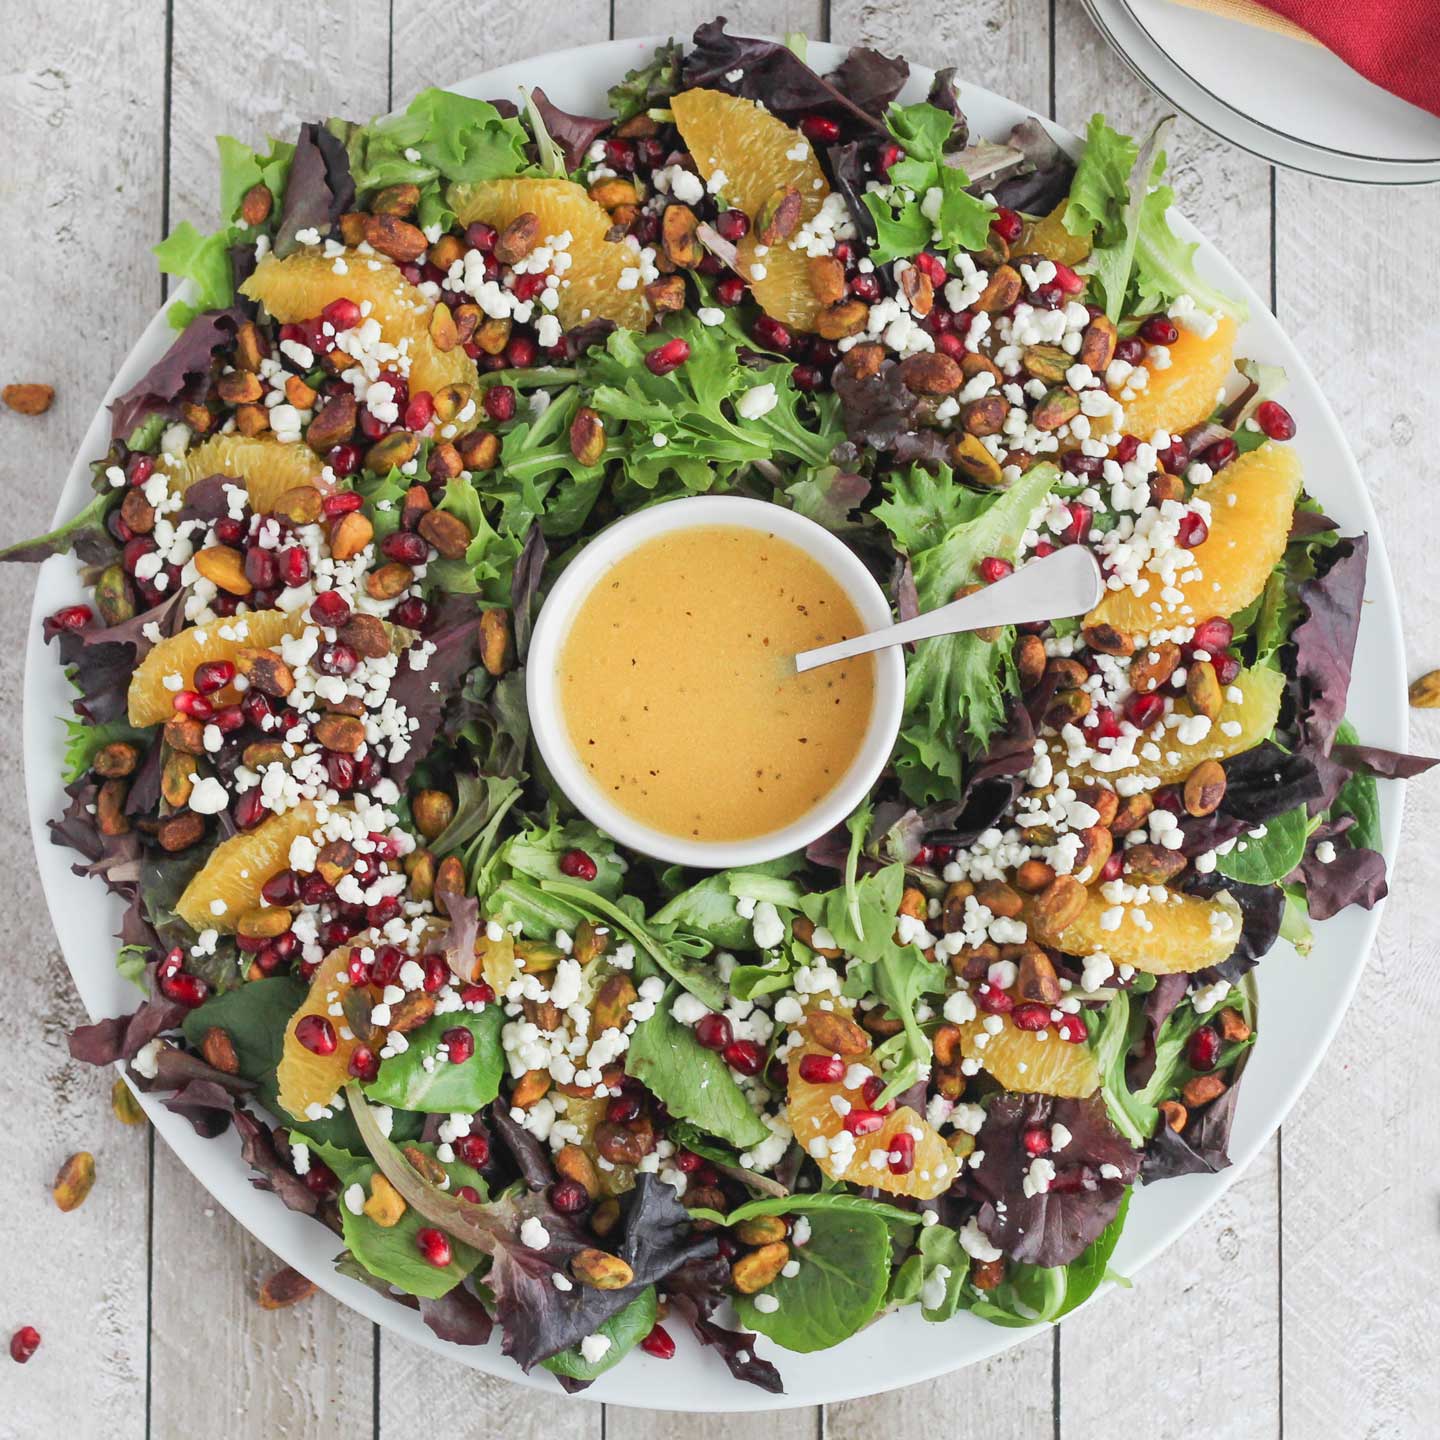 Our easy, beautiful Christmas Salad can even be served as a wreath! So delicious with pistachios, pomegranate, oranges and goat cheese with a light citrus-champagne vinaigrette!